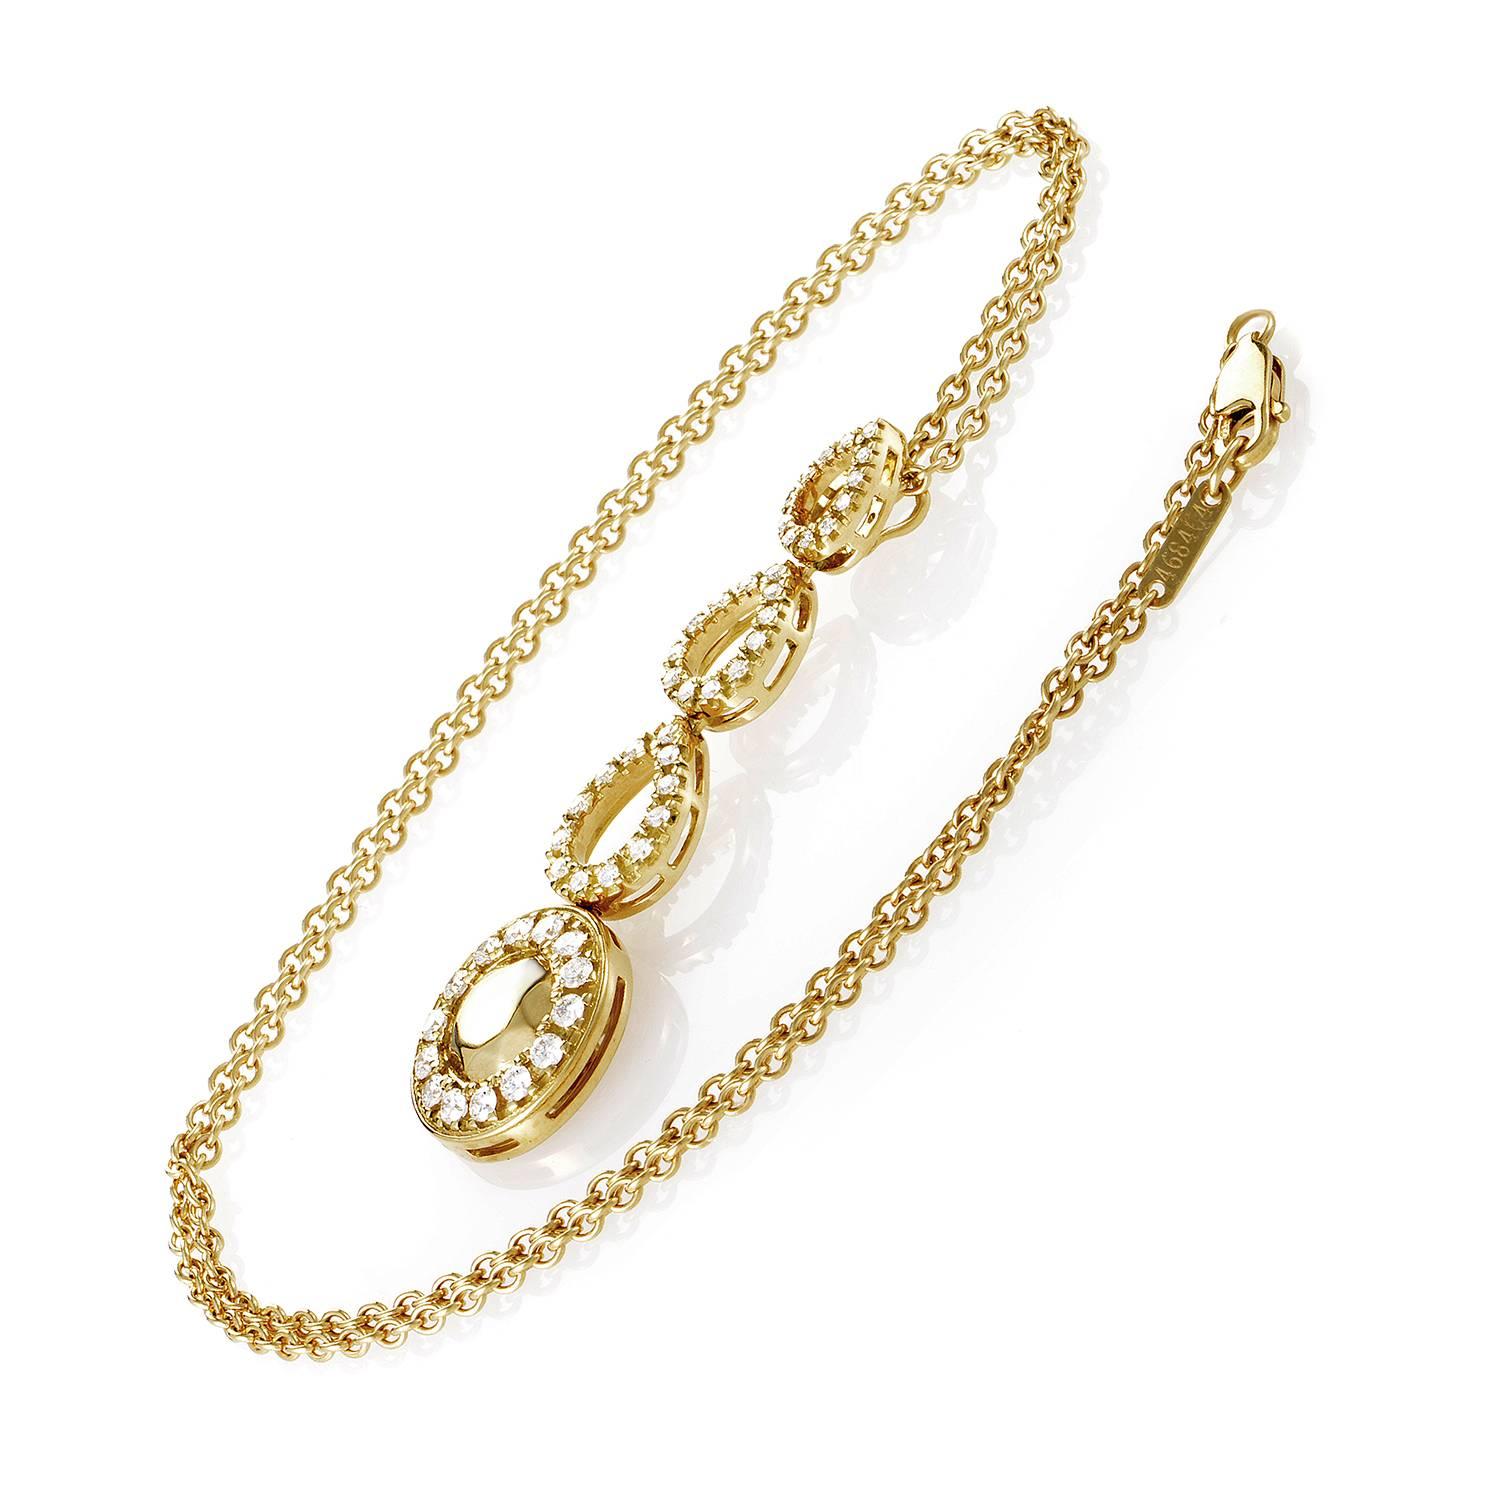 These tears are not weighed with melancholy but with luxury! The 18K Yellow gold chain drops in fine links toward the cumulative spill of three diamond-framed tears, their rich run culminating in the spherical punctuation of all the precious